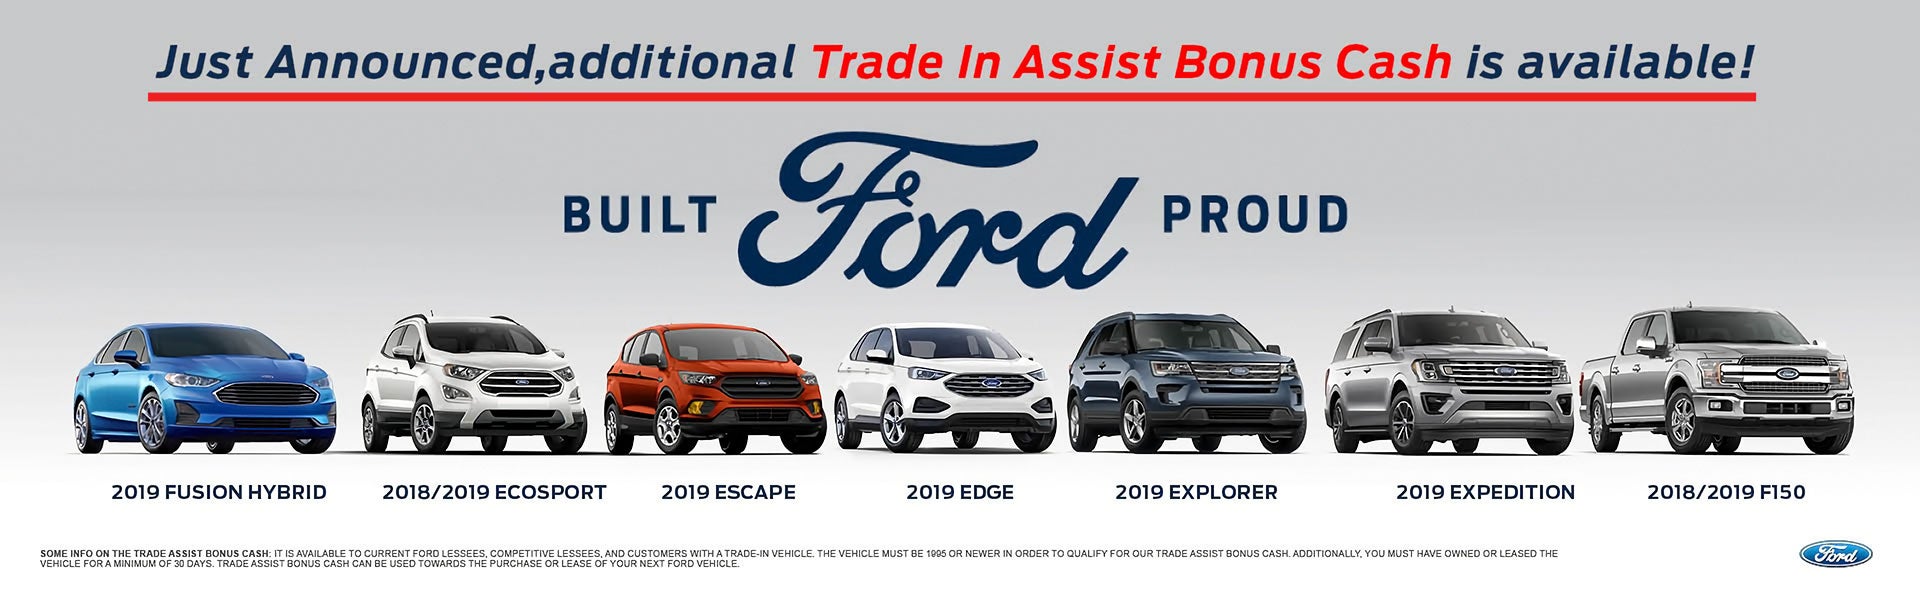 ford trade in